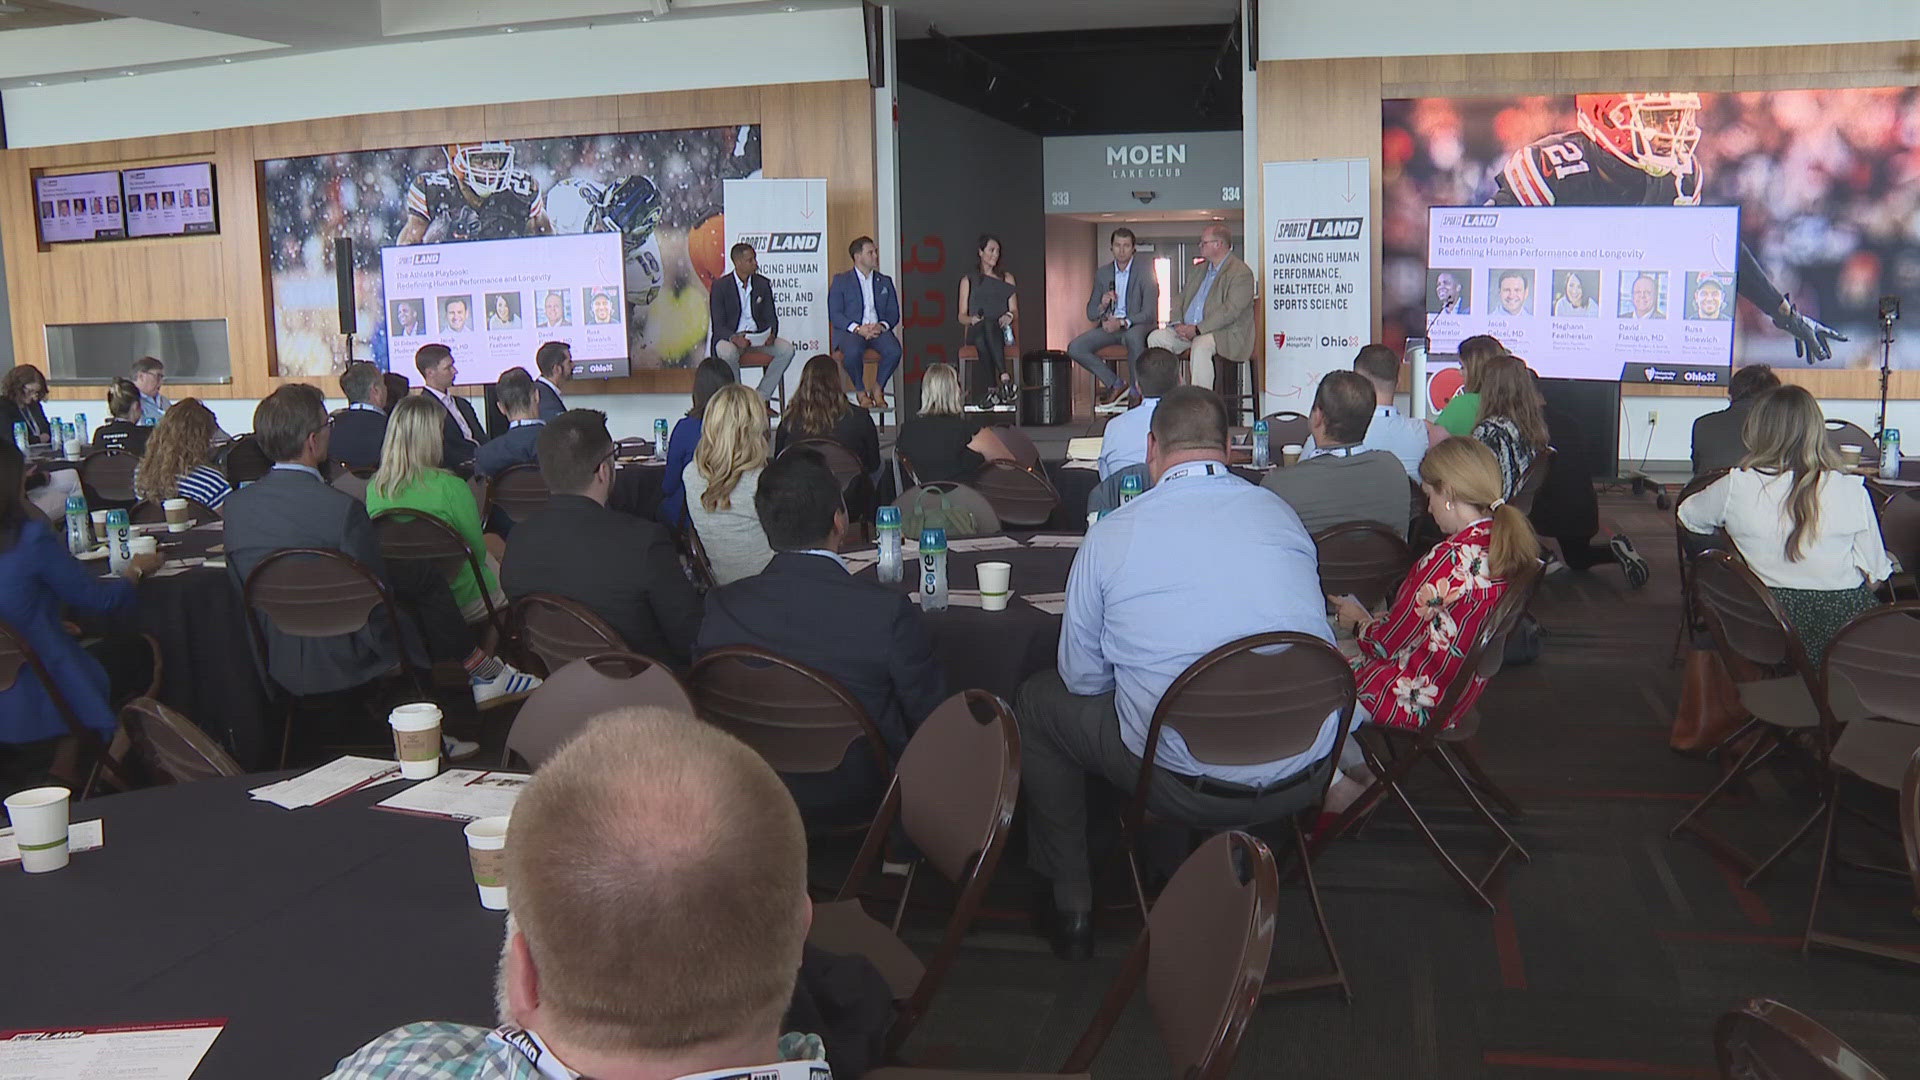 There was a meeting of the minds at Browns Stadium and it was for a lot more than just football. The topic was making Ohio a leader in sports tech and innovation.